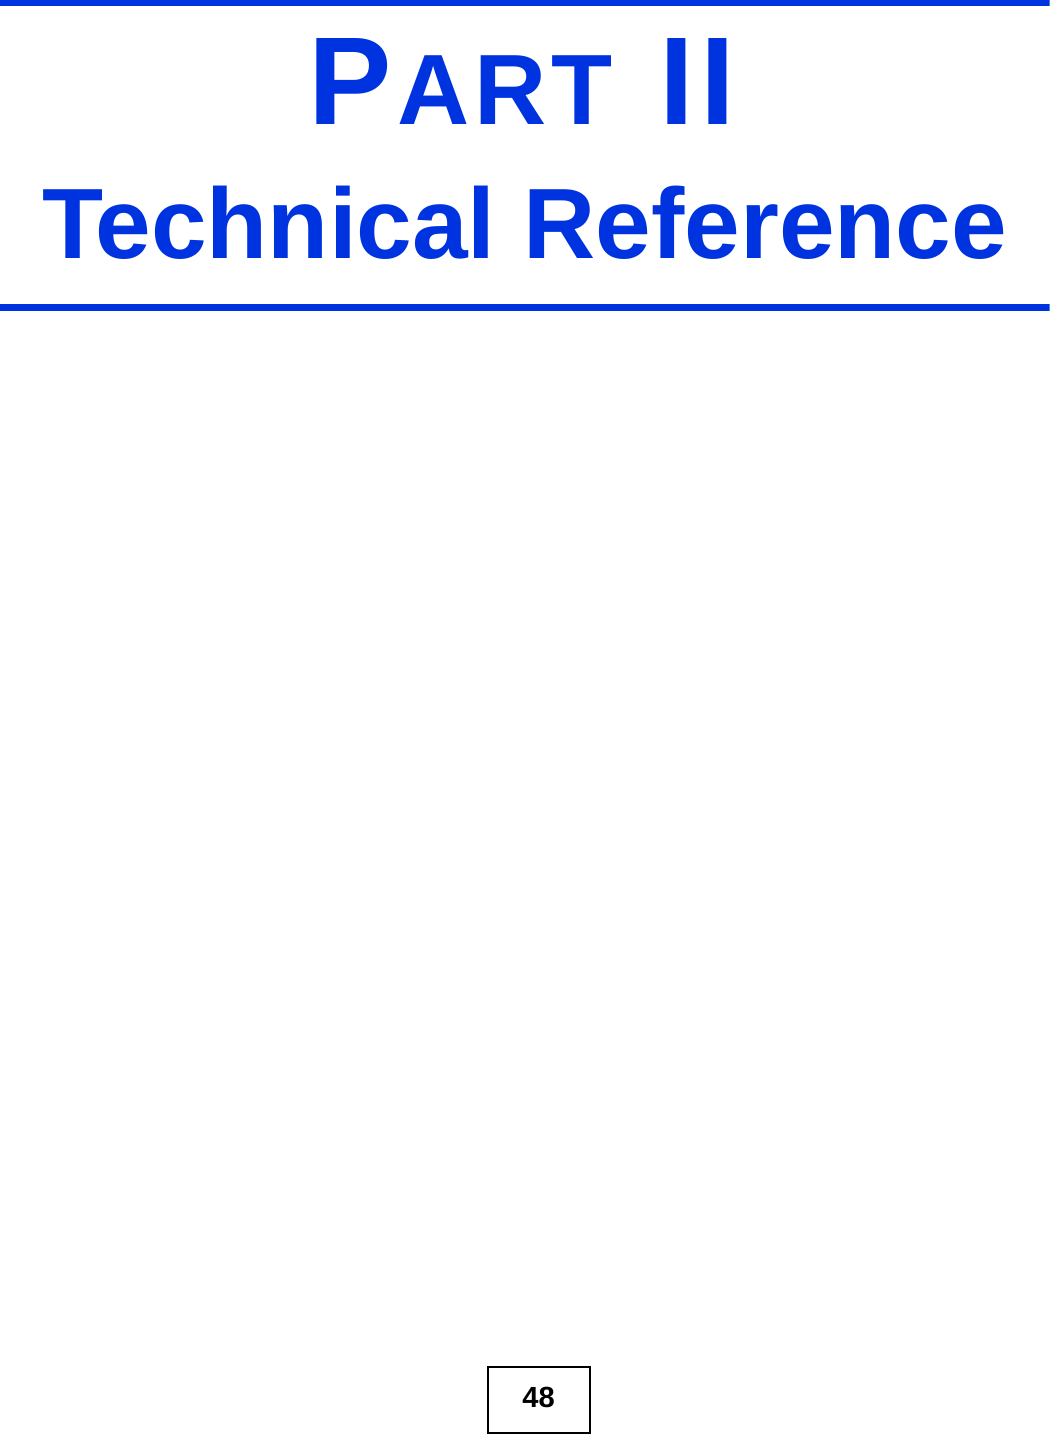 48PART IITechnical Reference